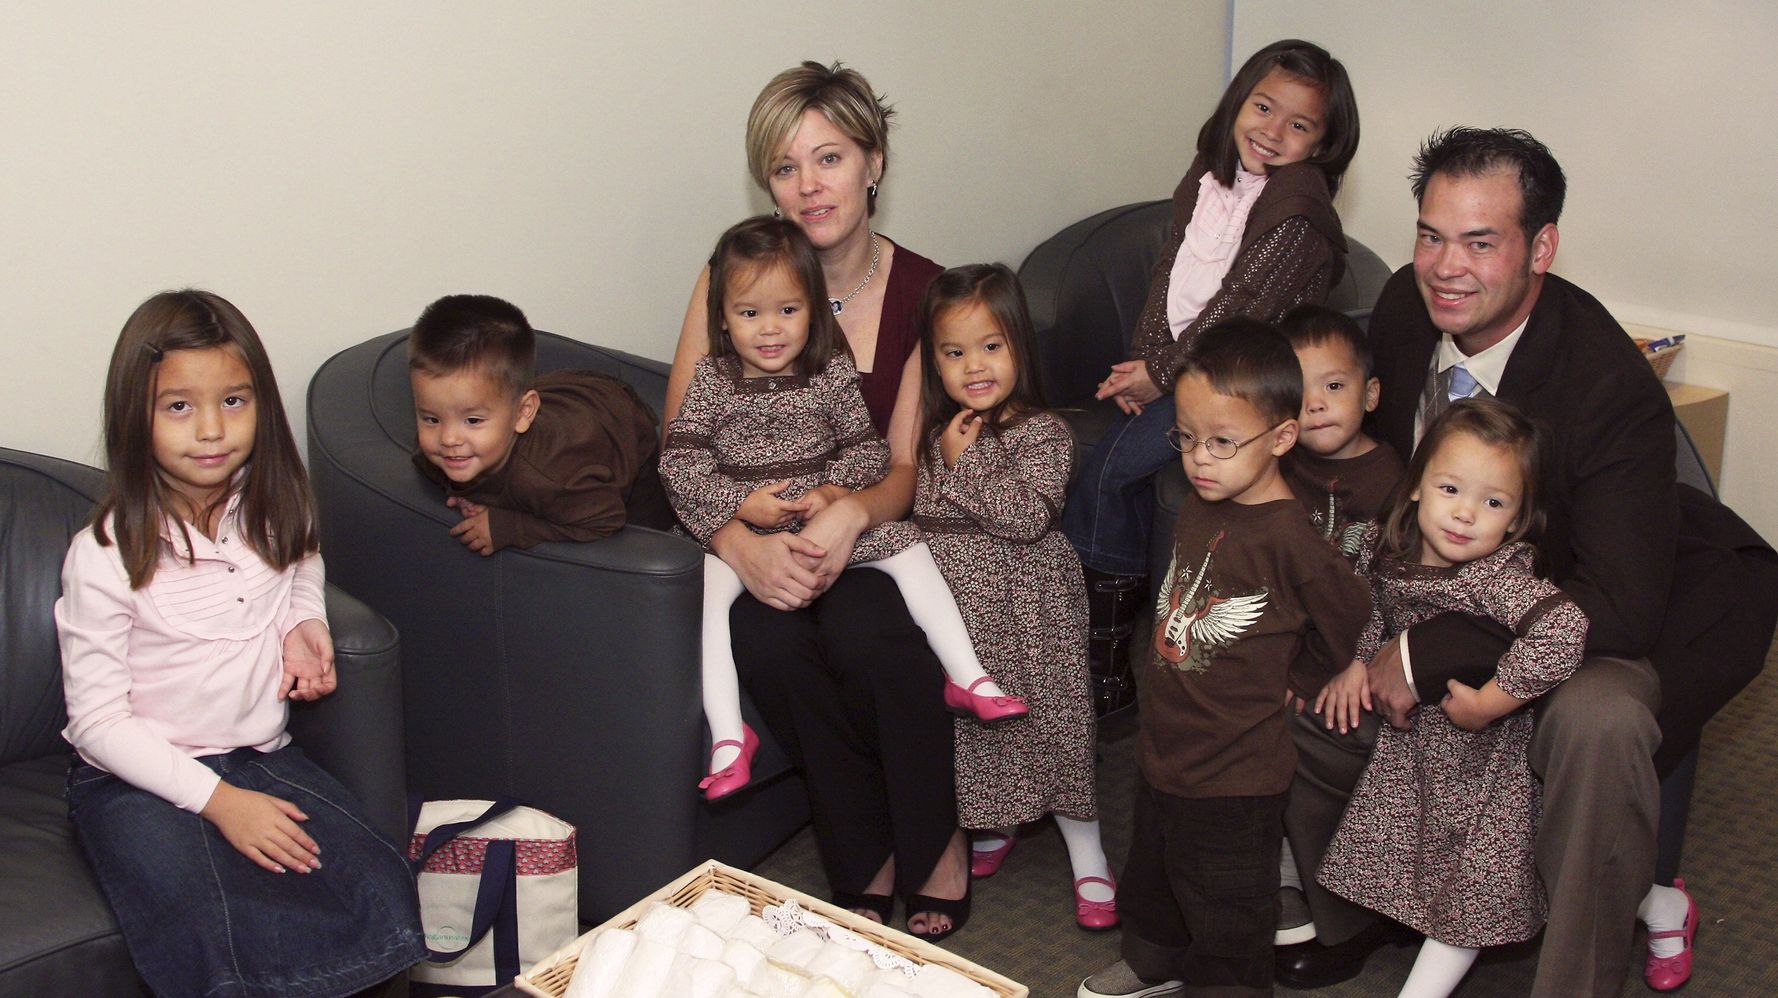 Collin Gosselin Opens Up On How 'Jon Kate Plus 8' 'Tore' His Family HuffPost